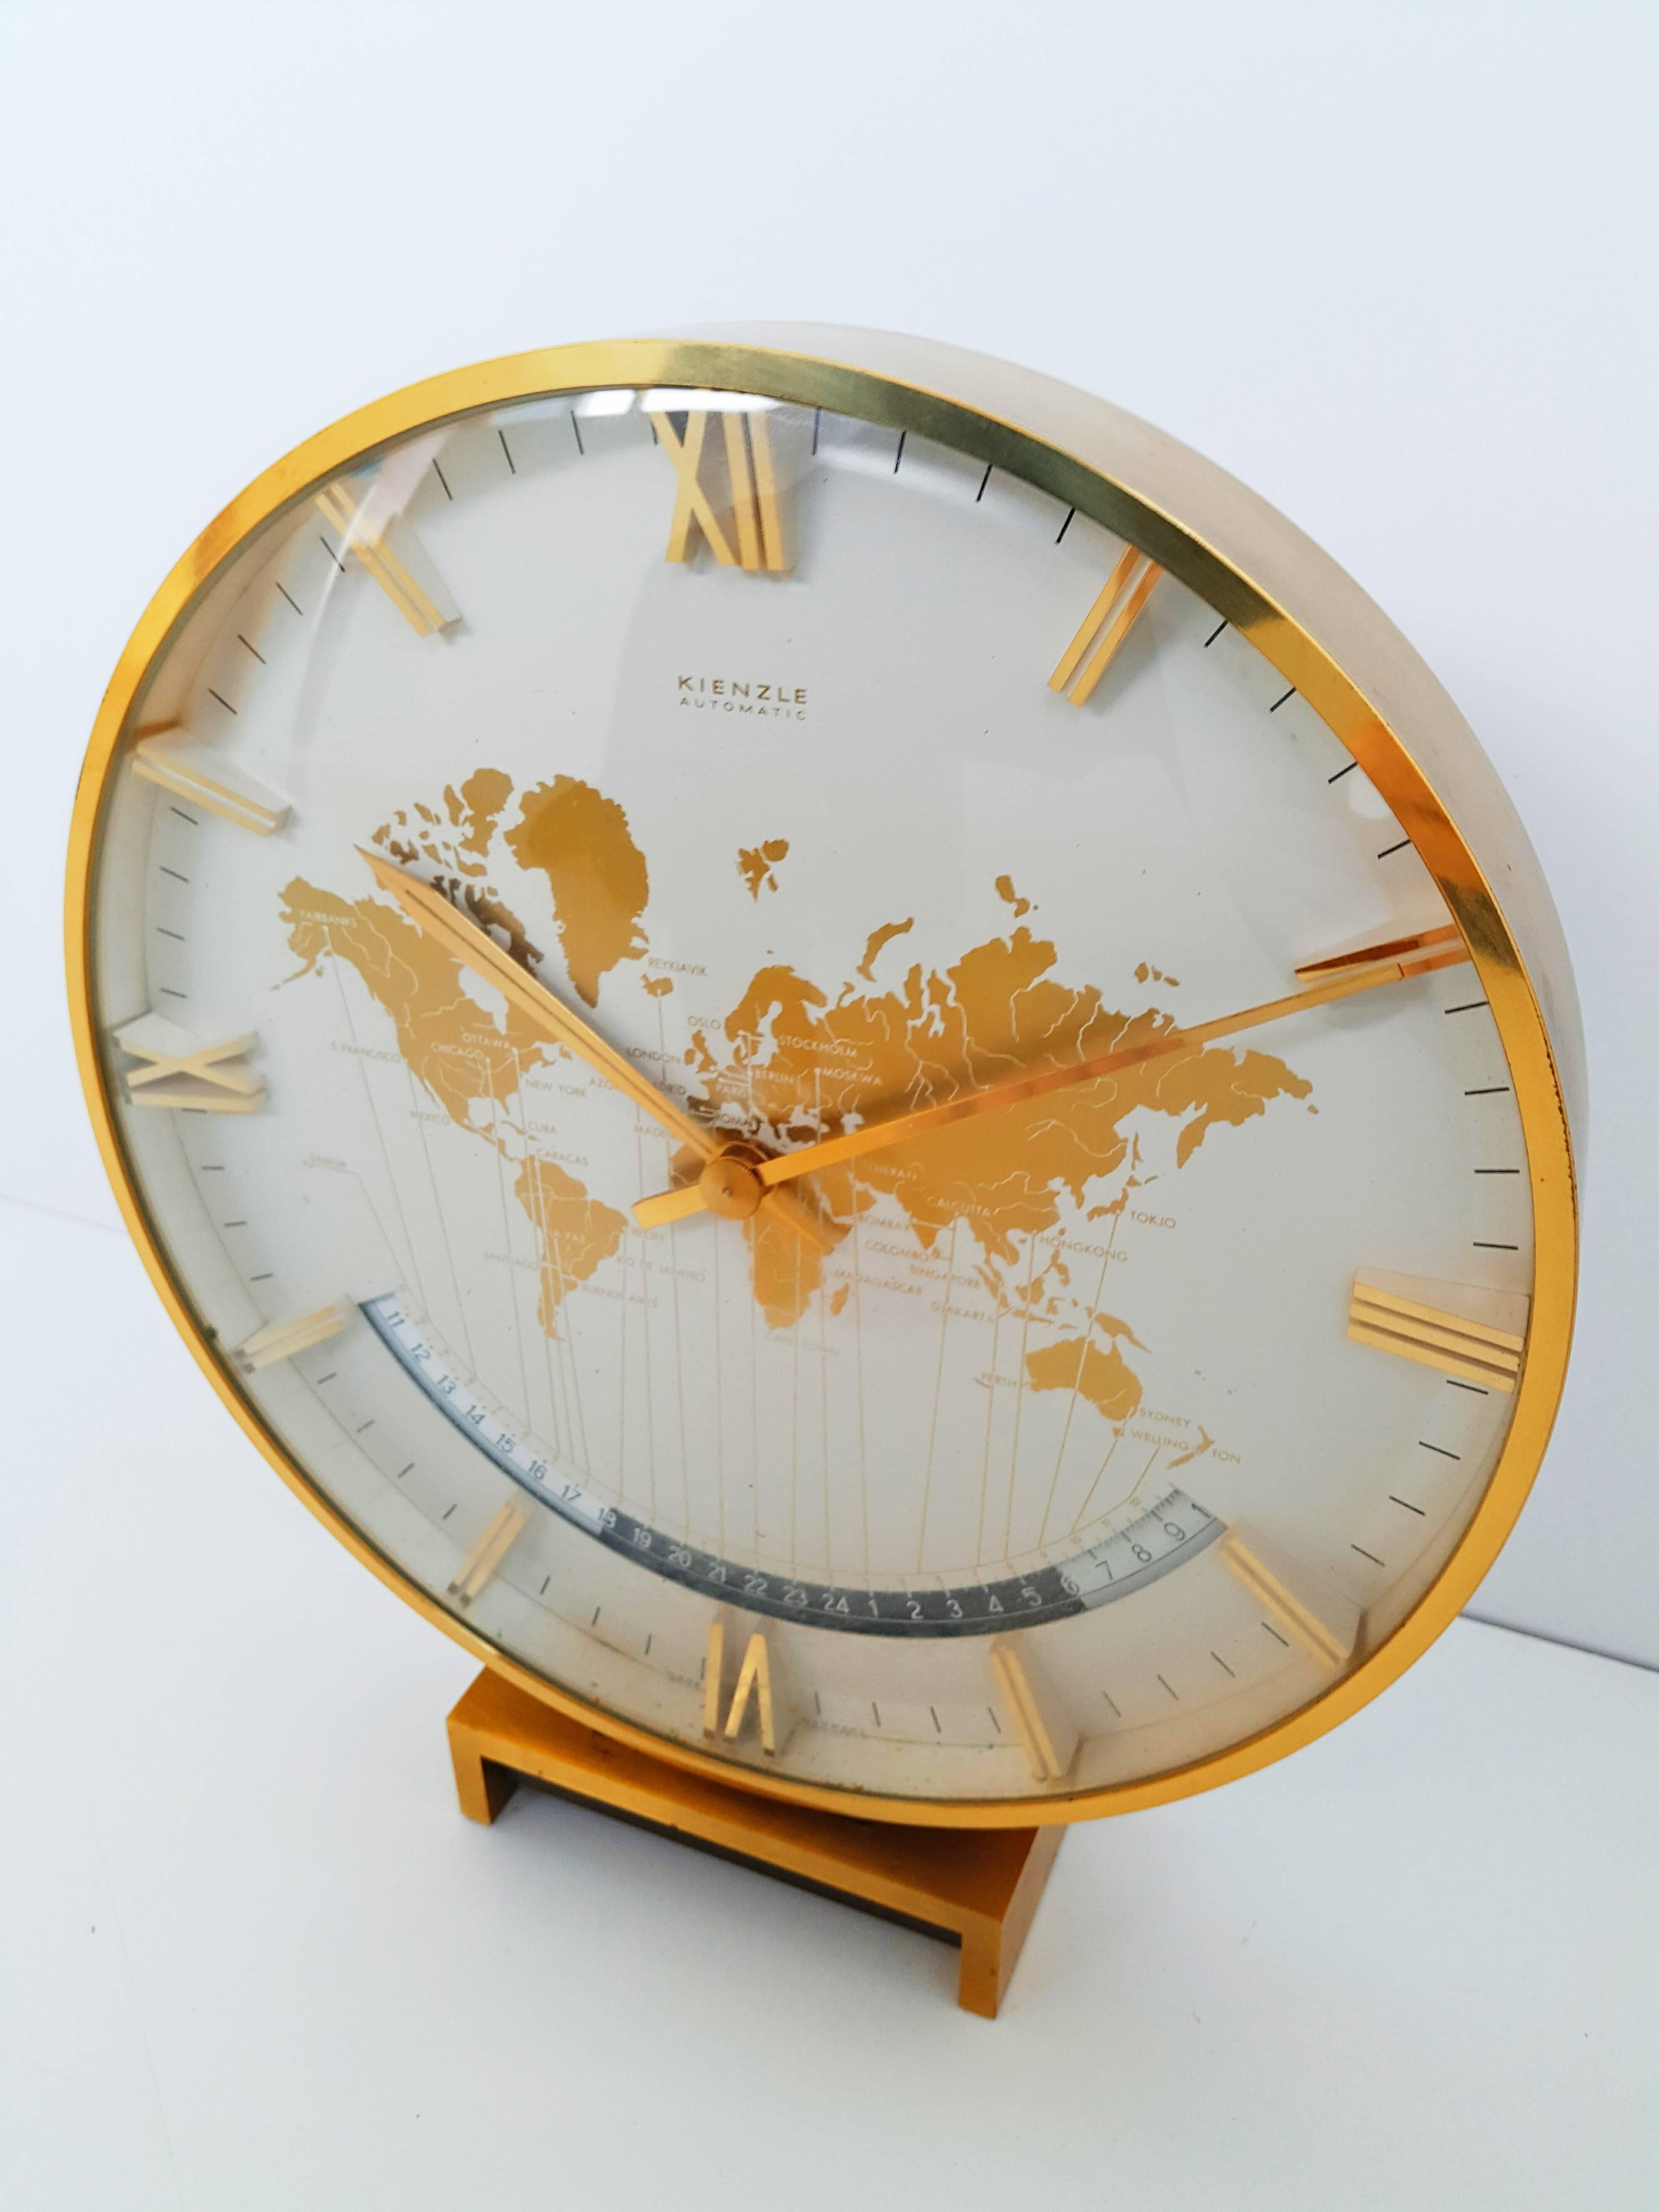 Kienzle automatic world timer zone clock. An exclusive big table clock from Ø 26cm wonderful clocks face with world map and world time zones, crystal glass, the heavy case and base are of solid brass. Battery movement. The most of Kienzle Clocks